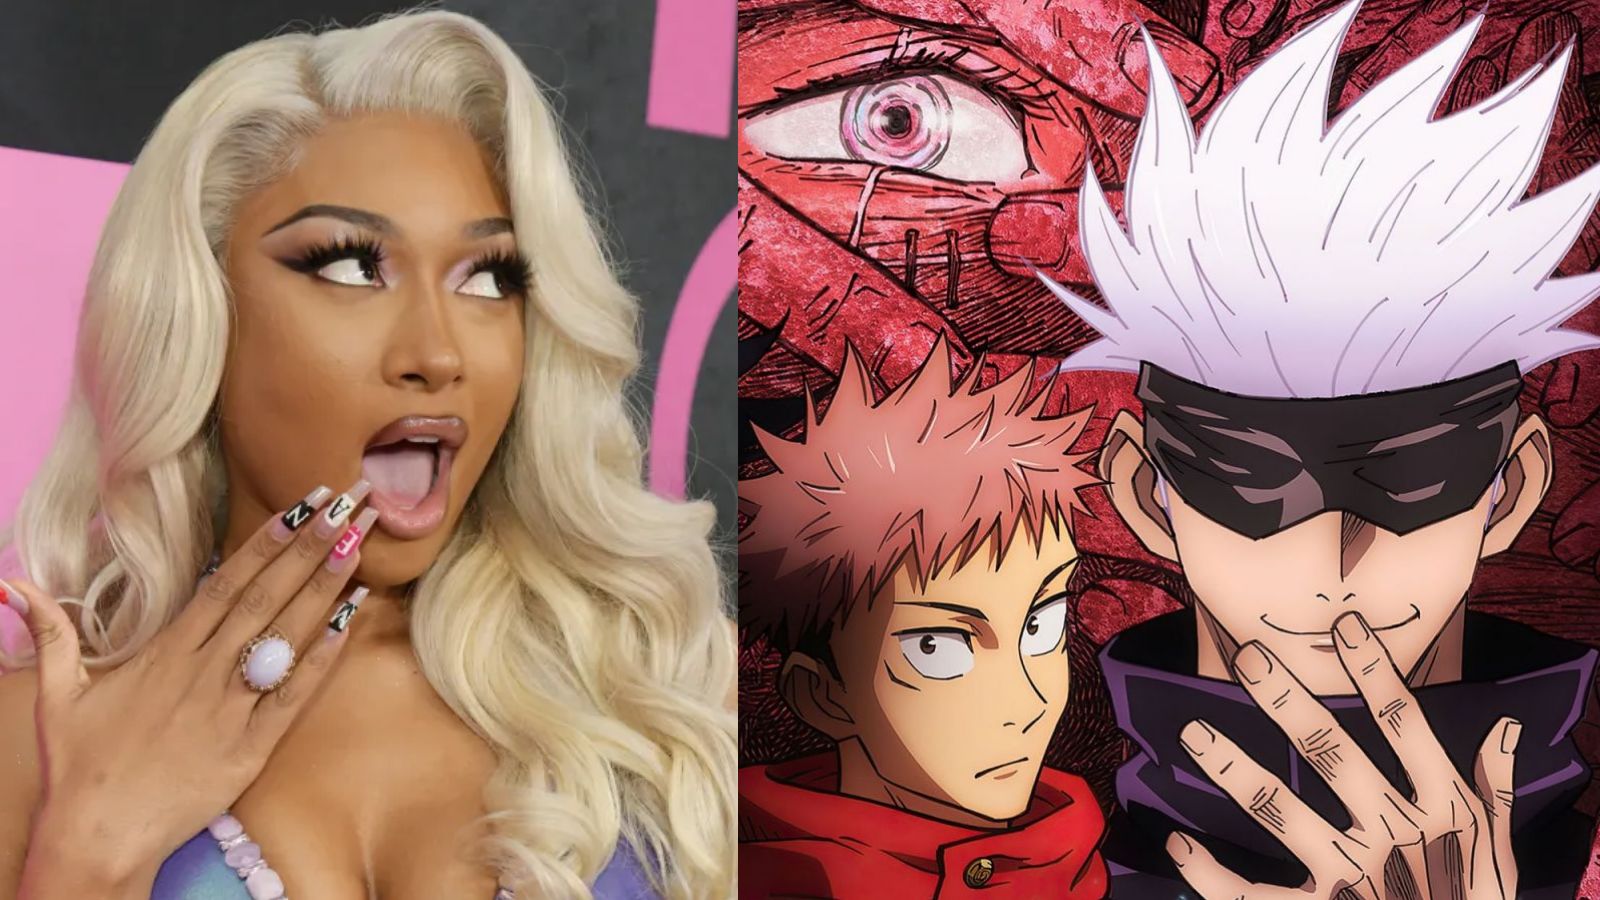 Jujutsu Kaisen fans are divided over Megan thee Stallion’s latest song